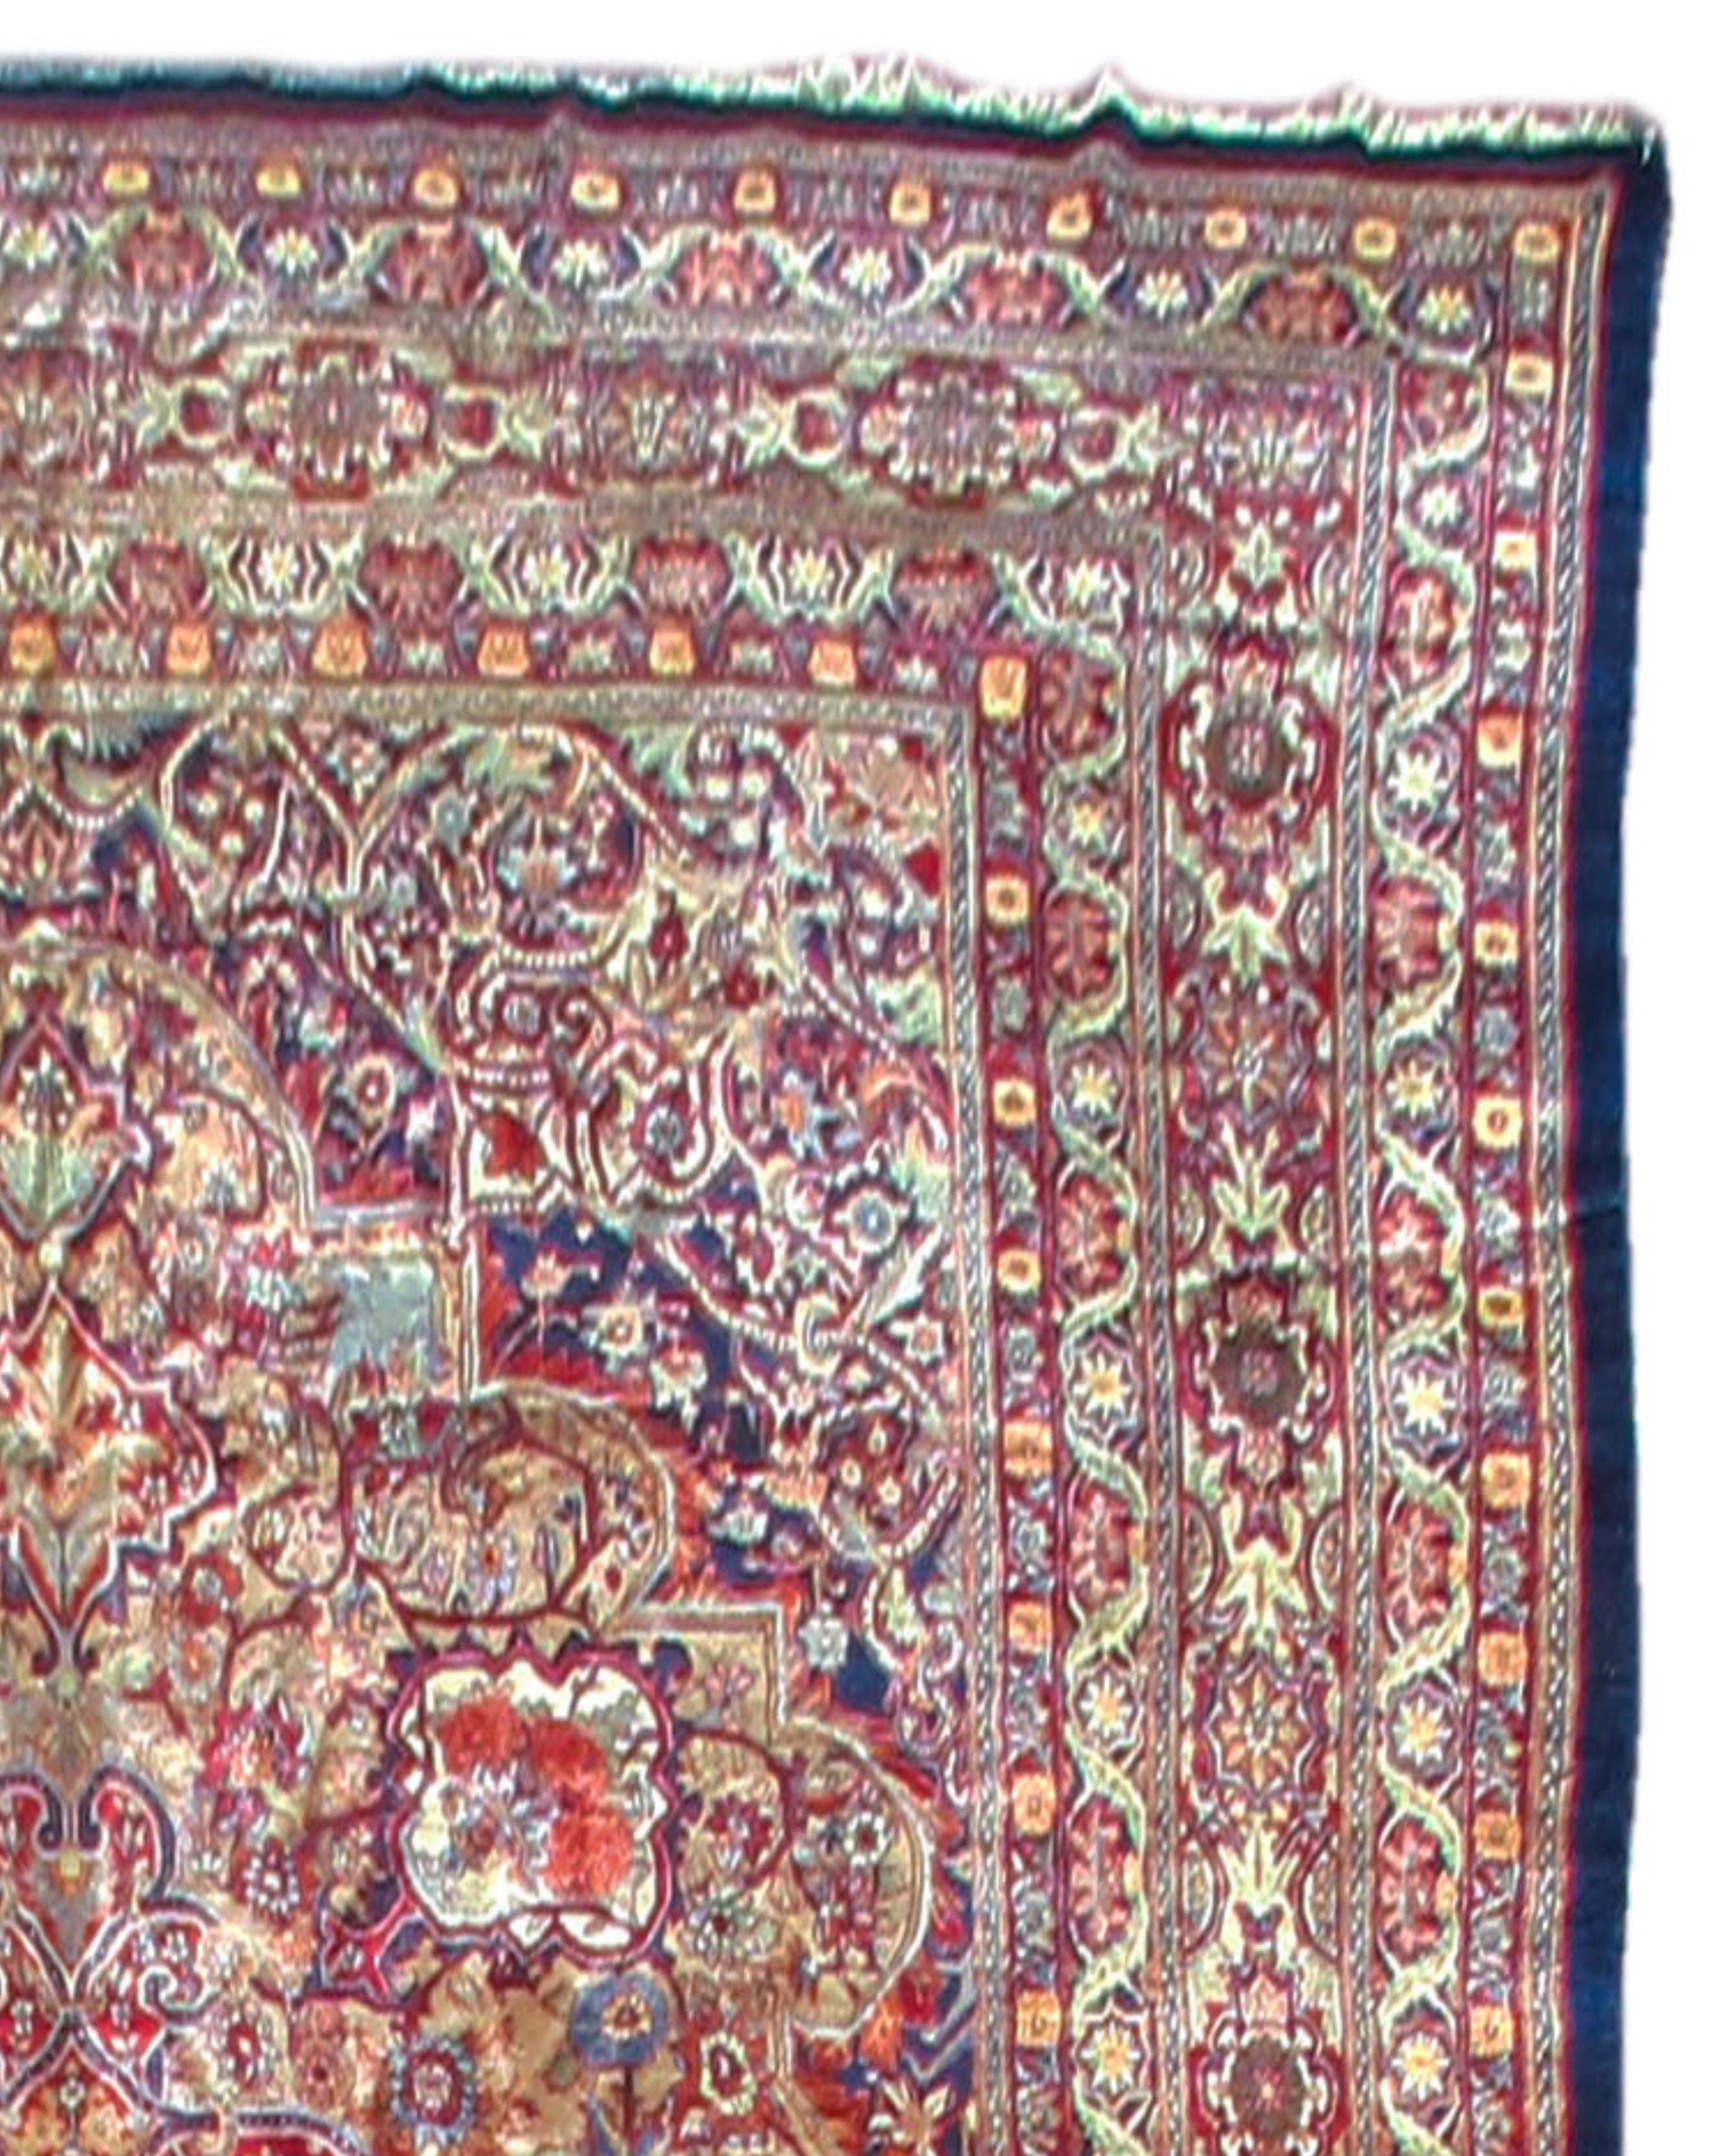 Antique Large Oversized Northeast Persian Carpet, Early 20th Century

Additional Information:
Dimensions: 11'8